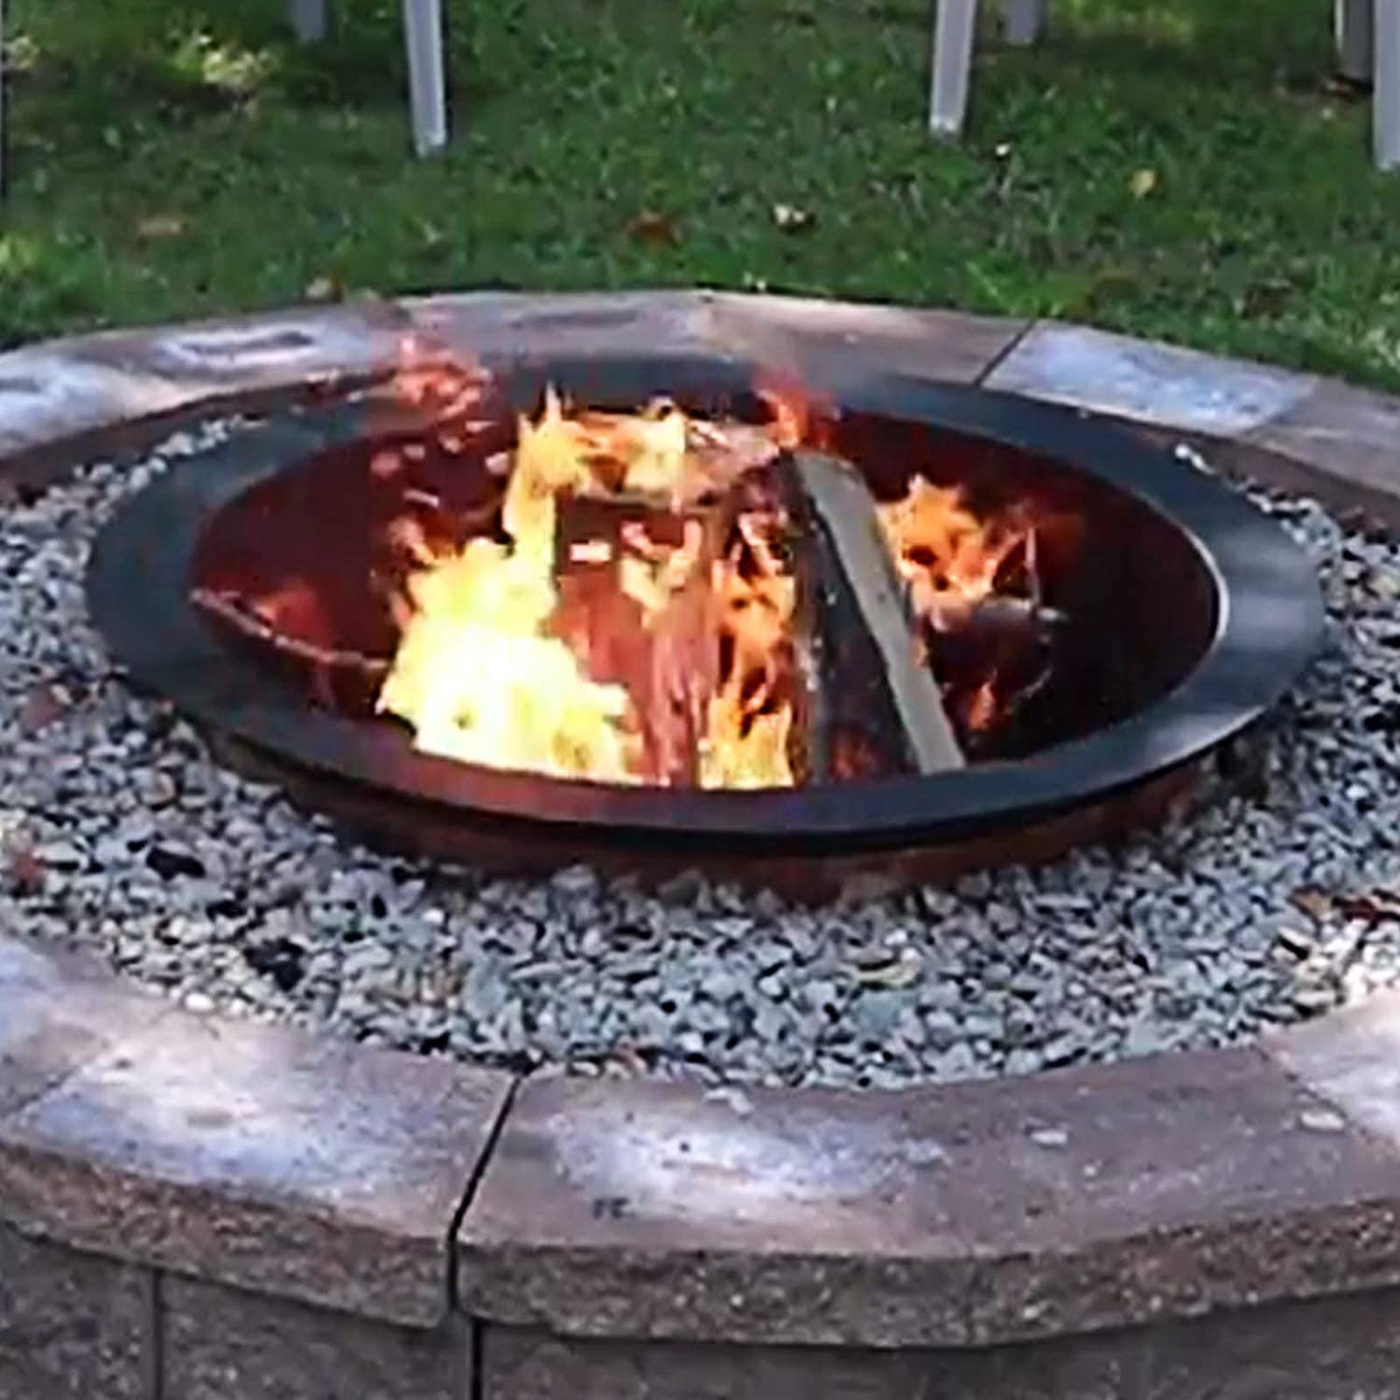 VBENLEM Fire Pit Ring 45-Inch Outer/39-Inch Inner Diameter, 3.0mm Thick Heavy Duty Solid Steel, Fire Pit Liner DIY Campfire Ring Above or In-Ground for Outdoor